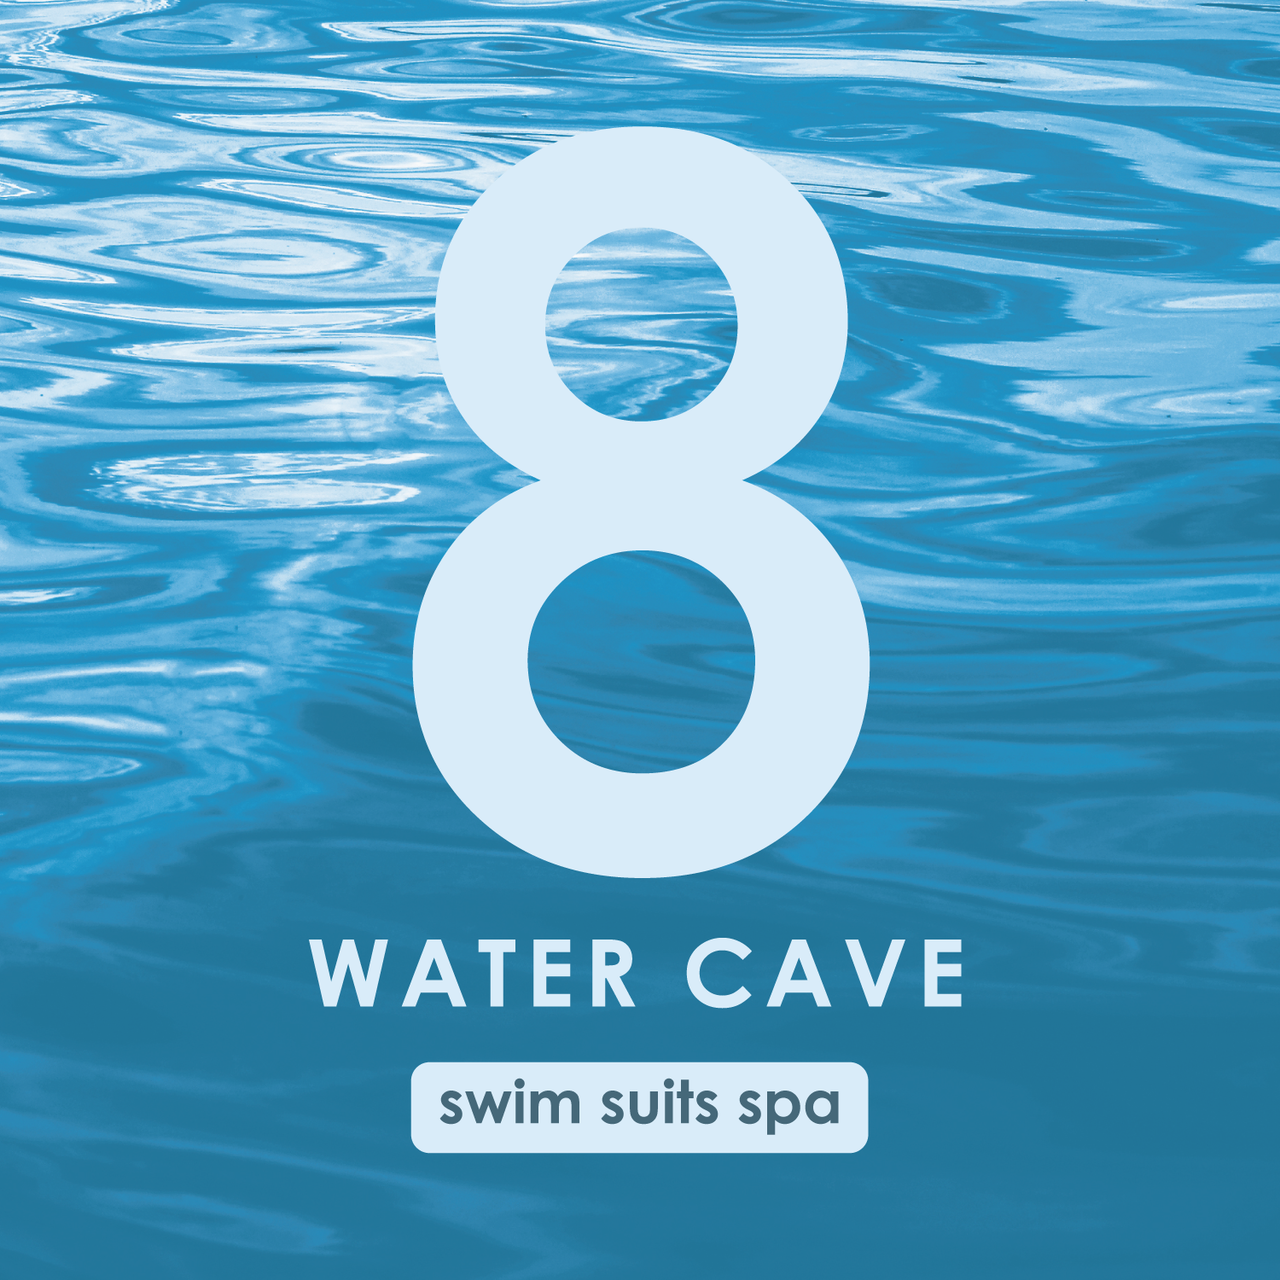 8 WATER CAVE